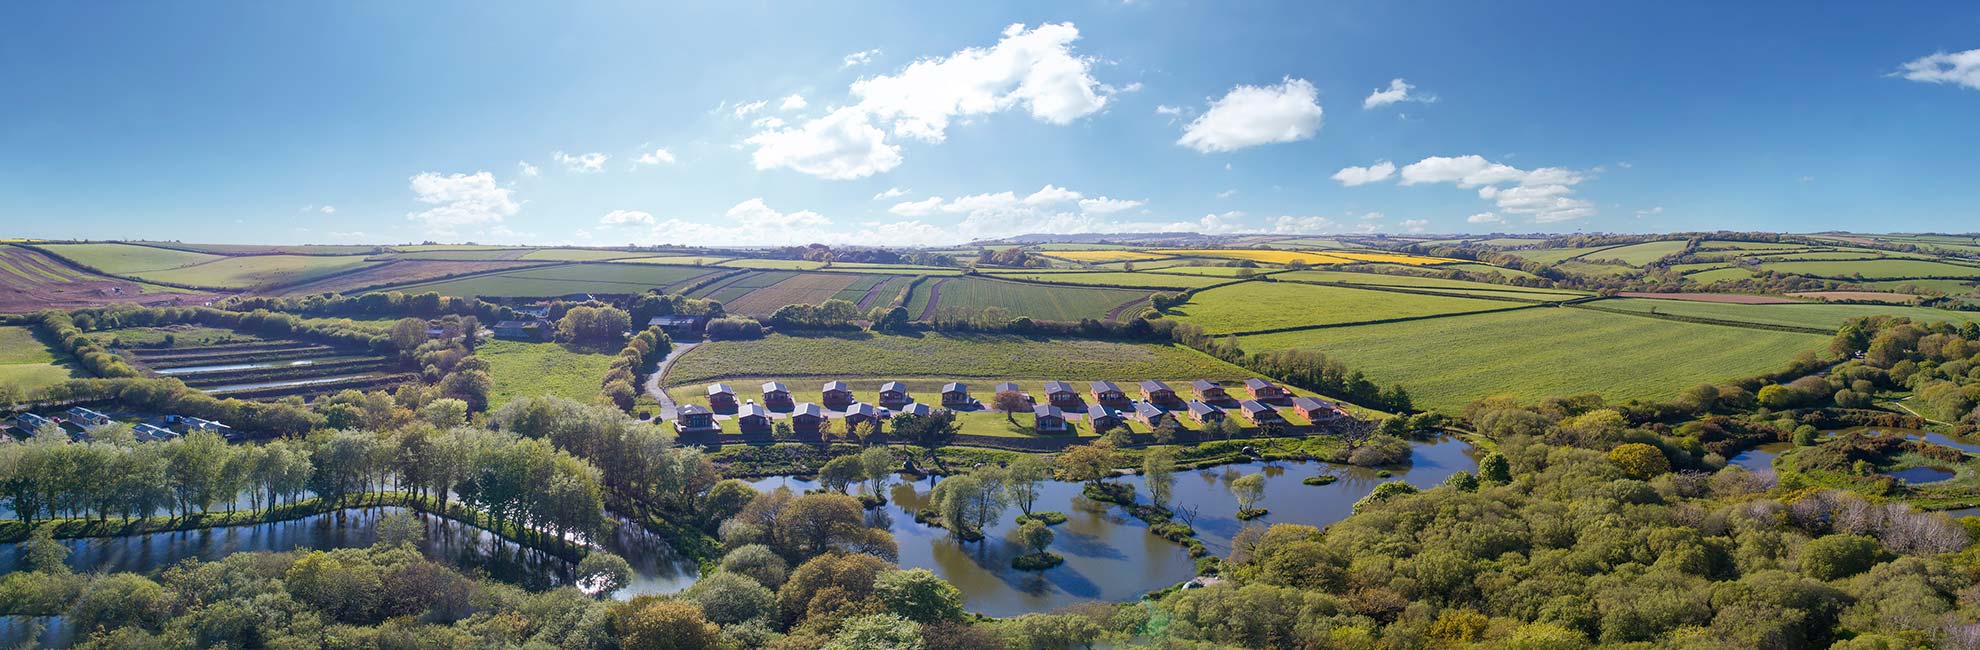 An aerial view of White Acres Holiday Park and surrounding countryside